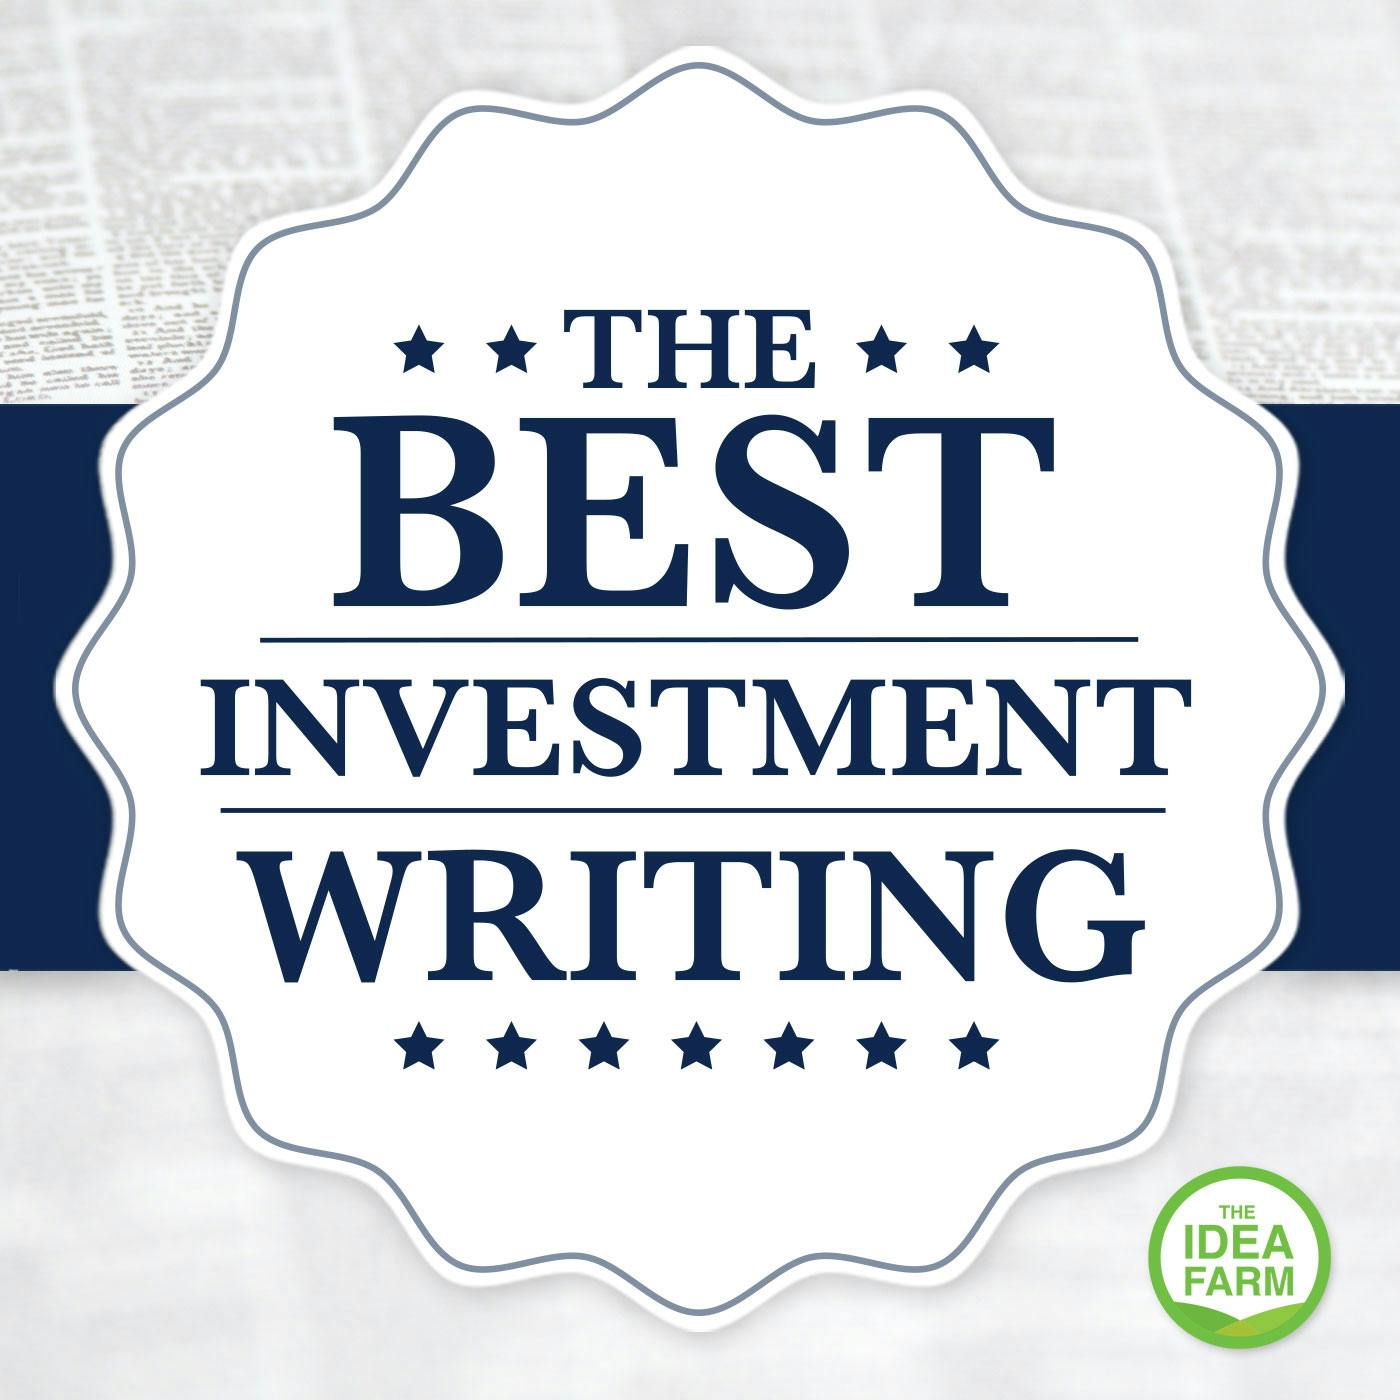 The Best Investment Writing Volume 3: Wes Gray – Factor Investing Fact Check: Are Value and Momentum Dead?